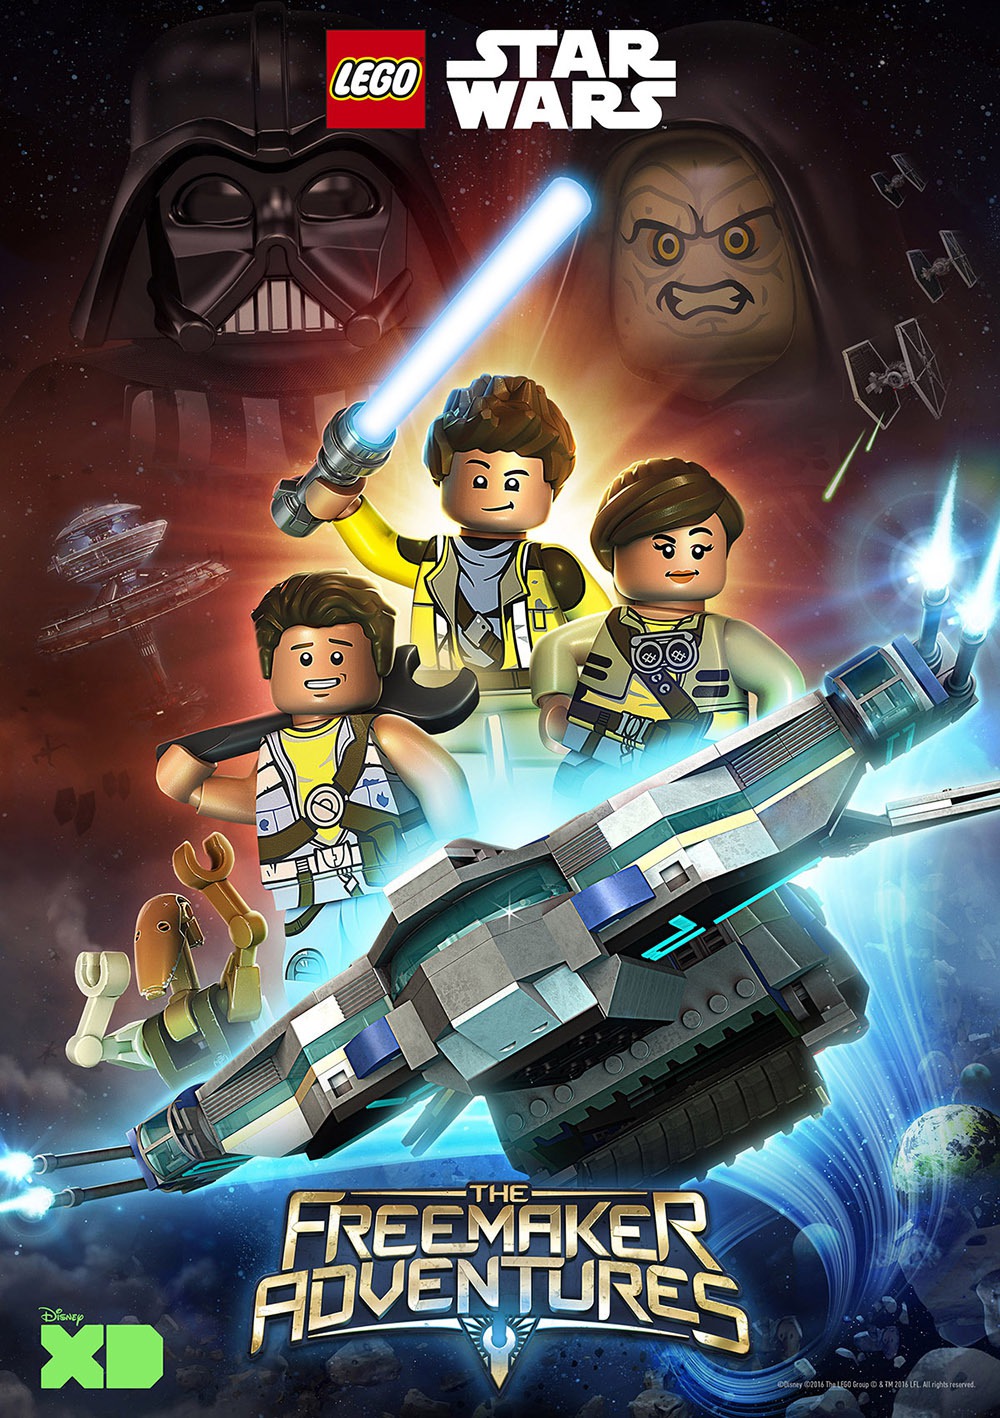 Extra Large TV Poster Image for Lego Star Wars: The Freemaker Adventures 